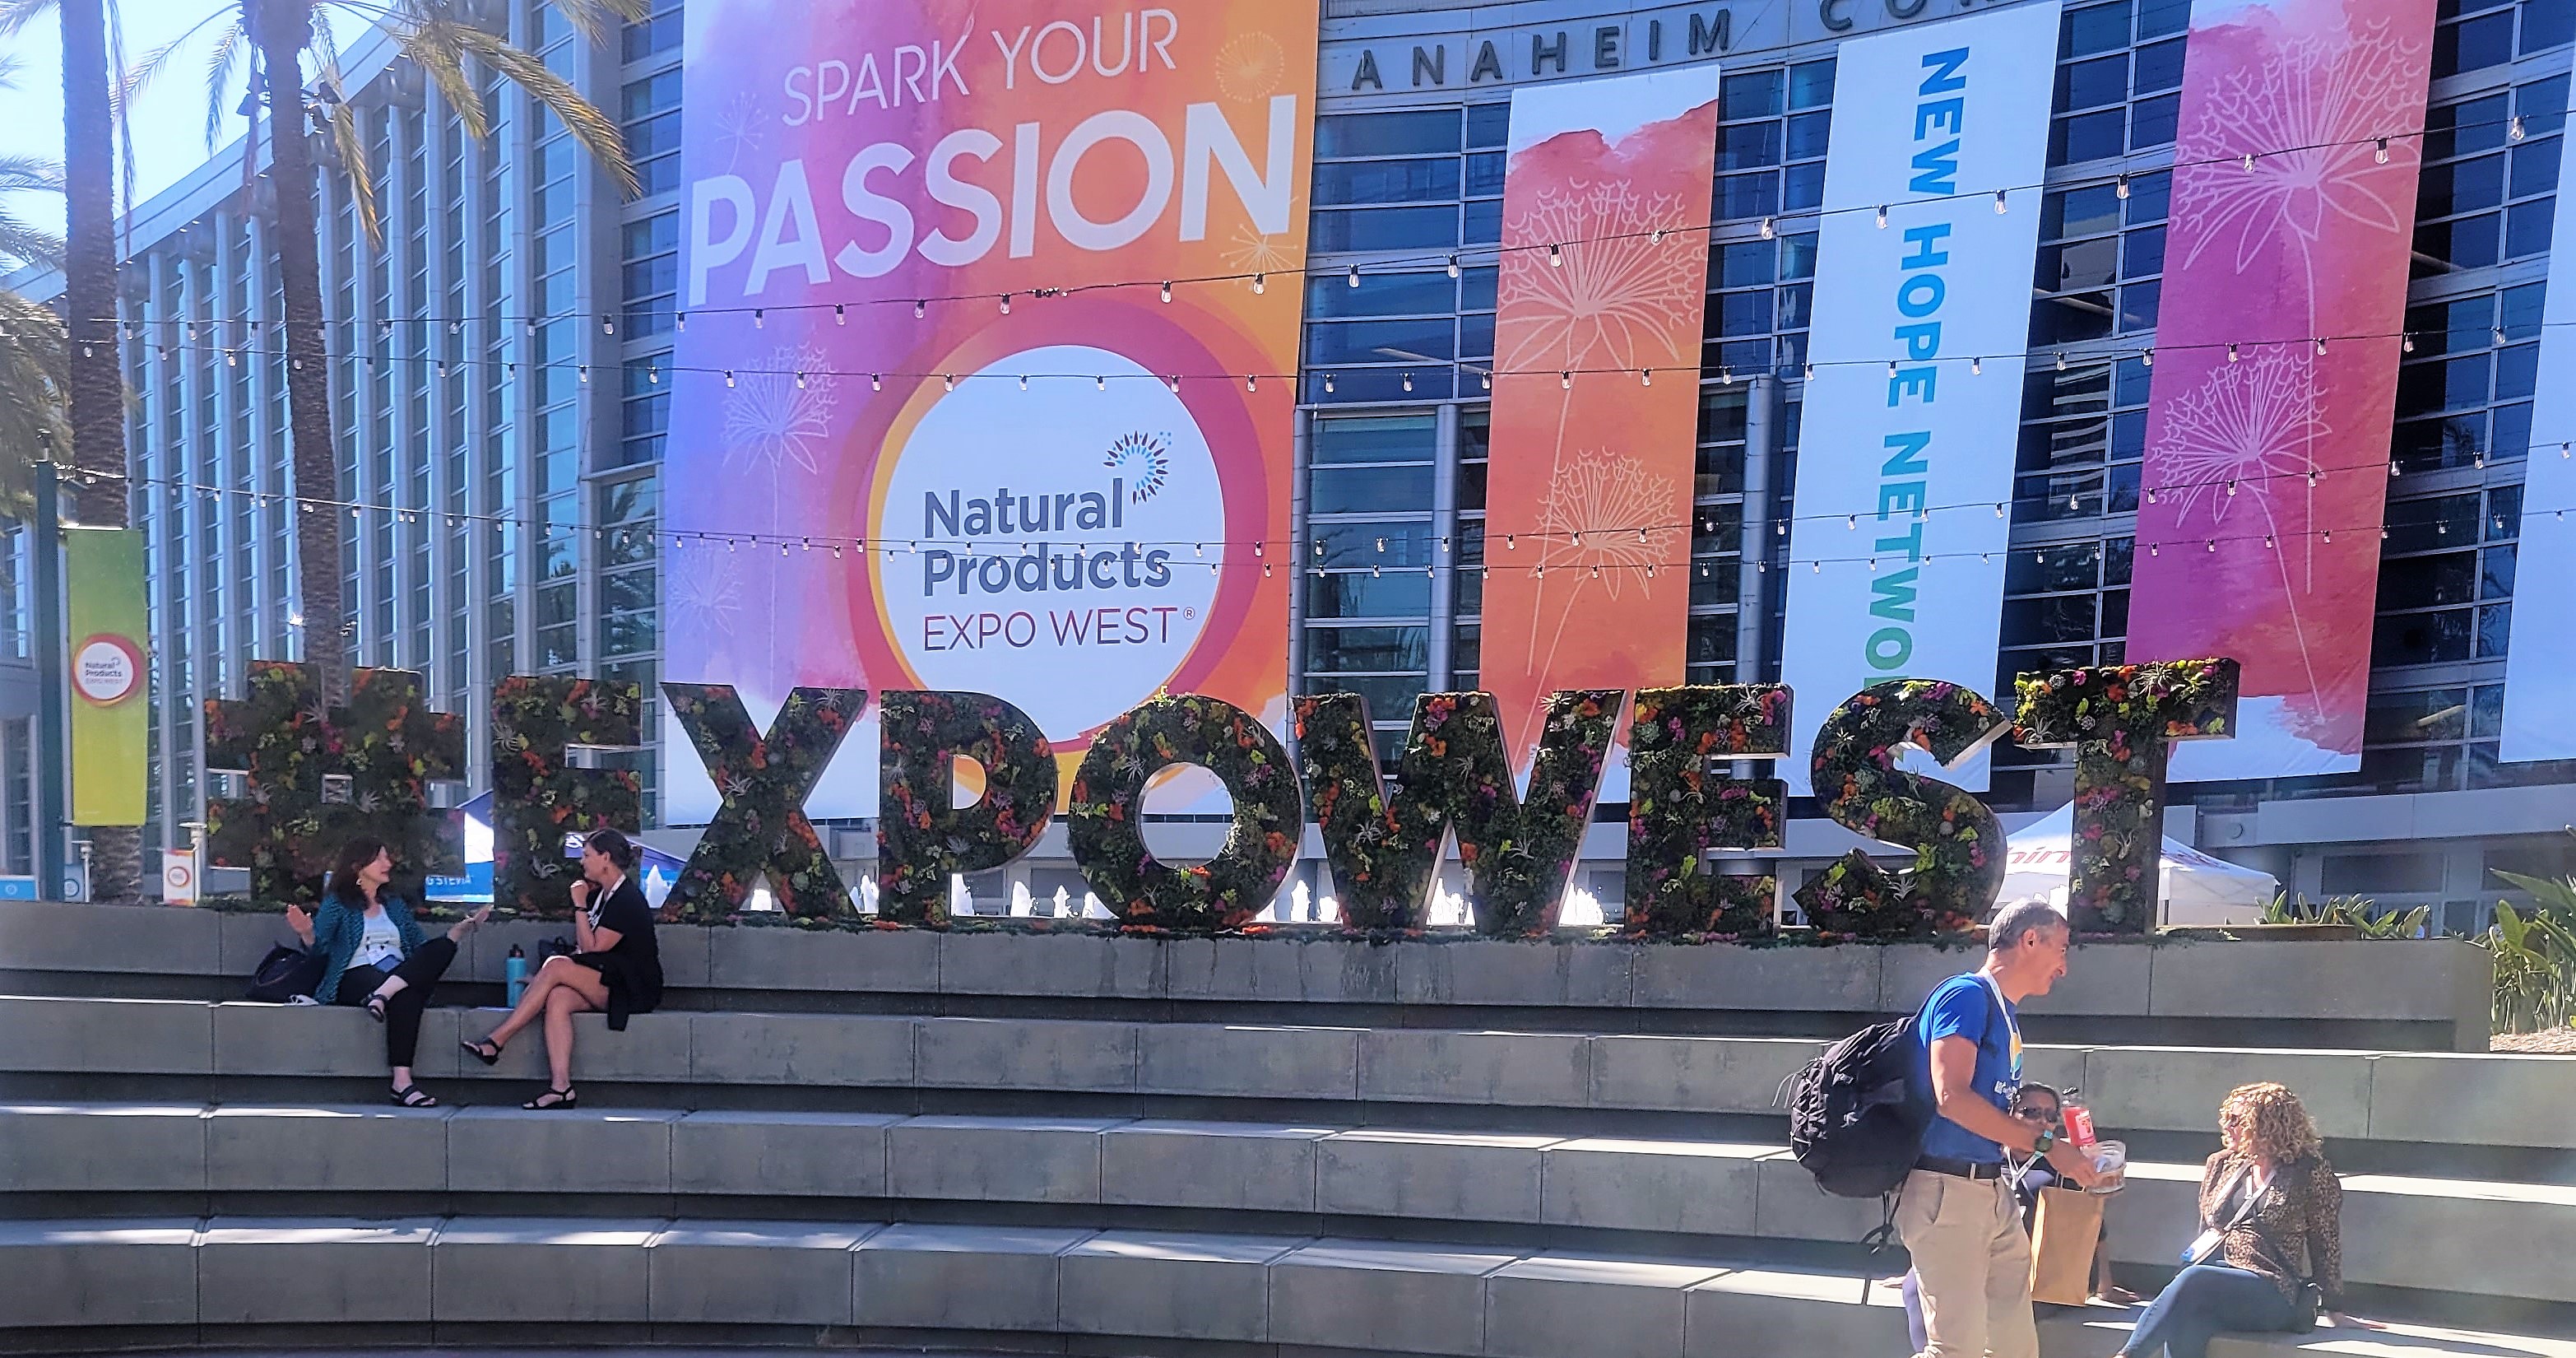 Hashtag expo west at Natural Products Expo West